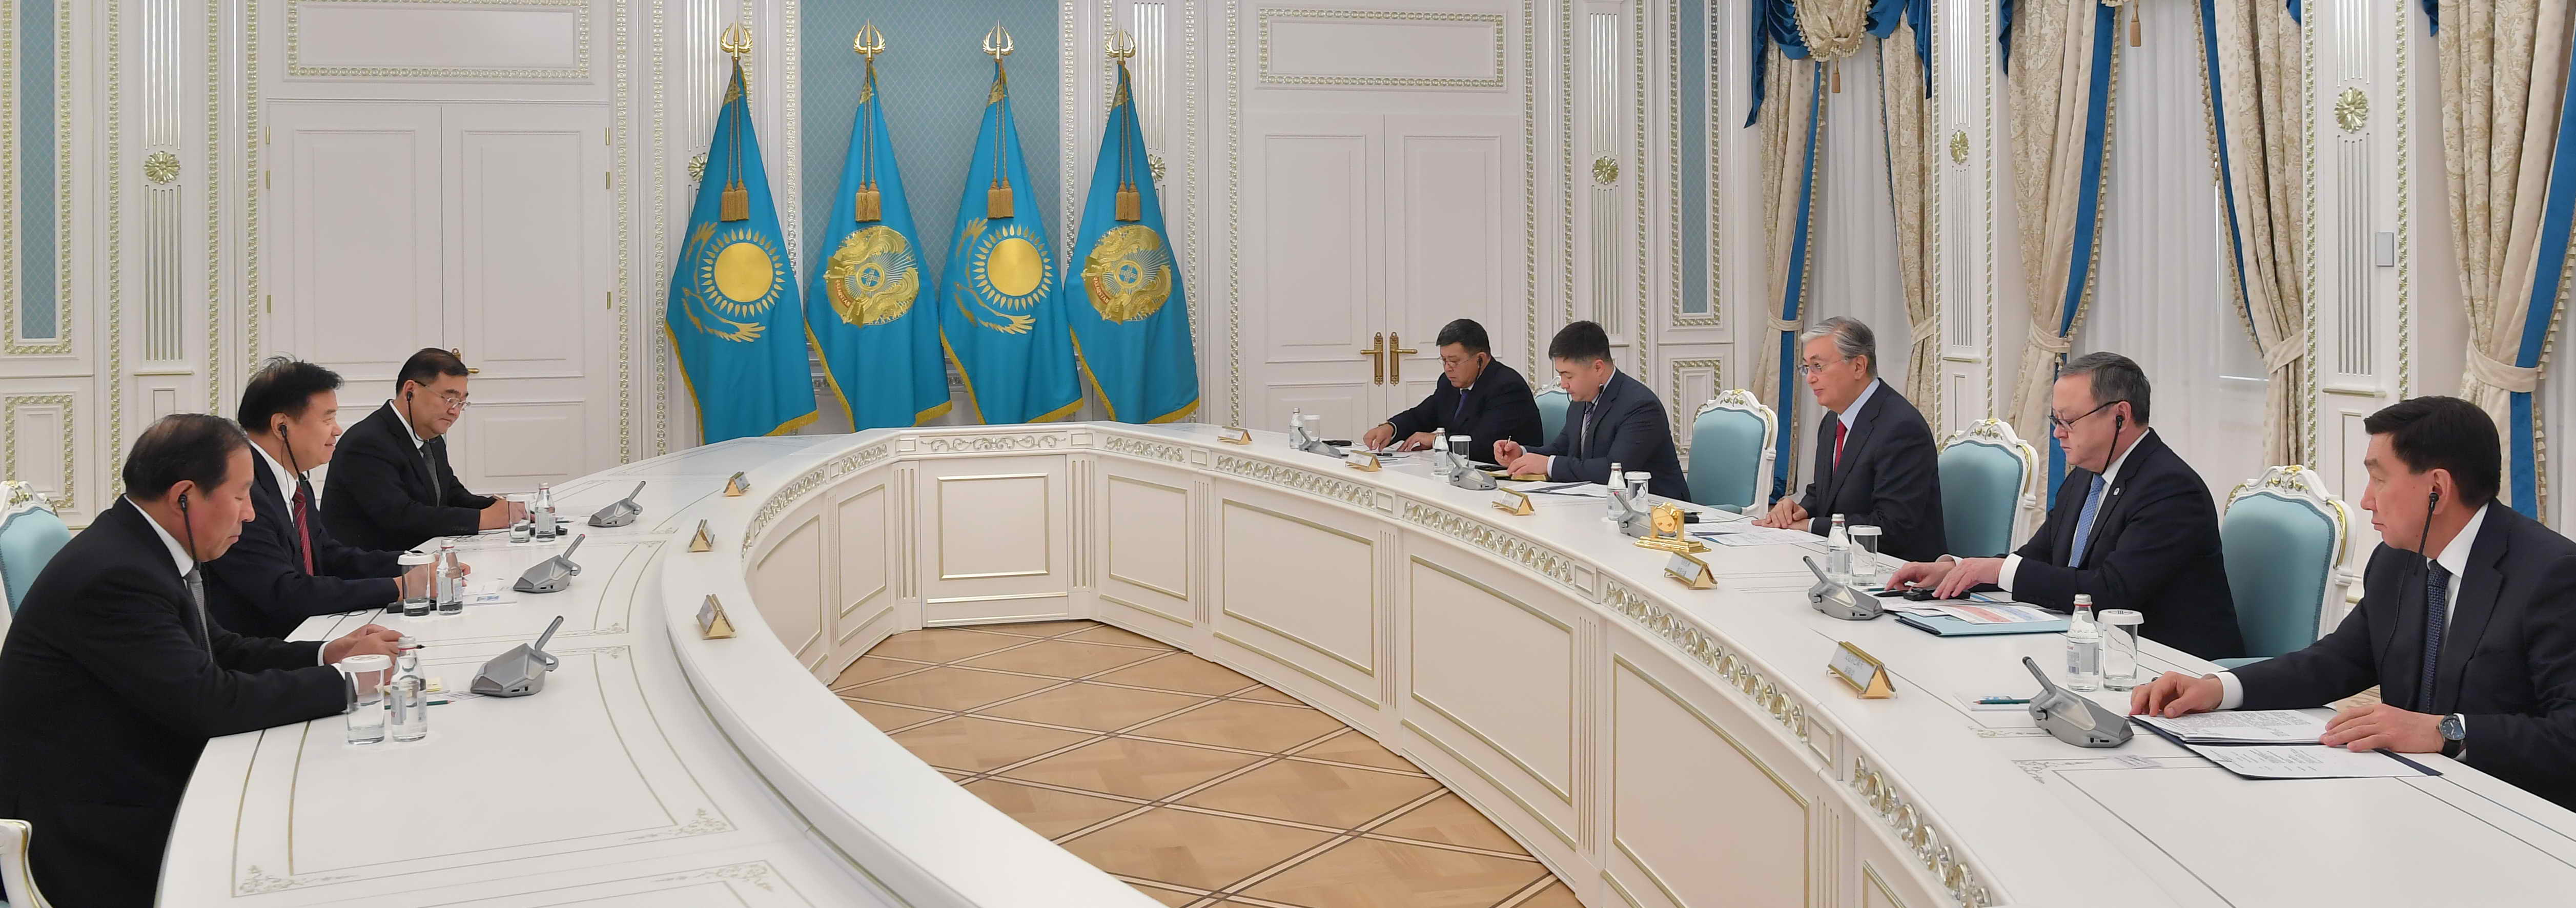 Head of state meets with CNPC board chairman